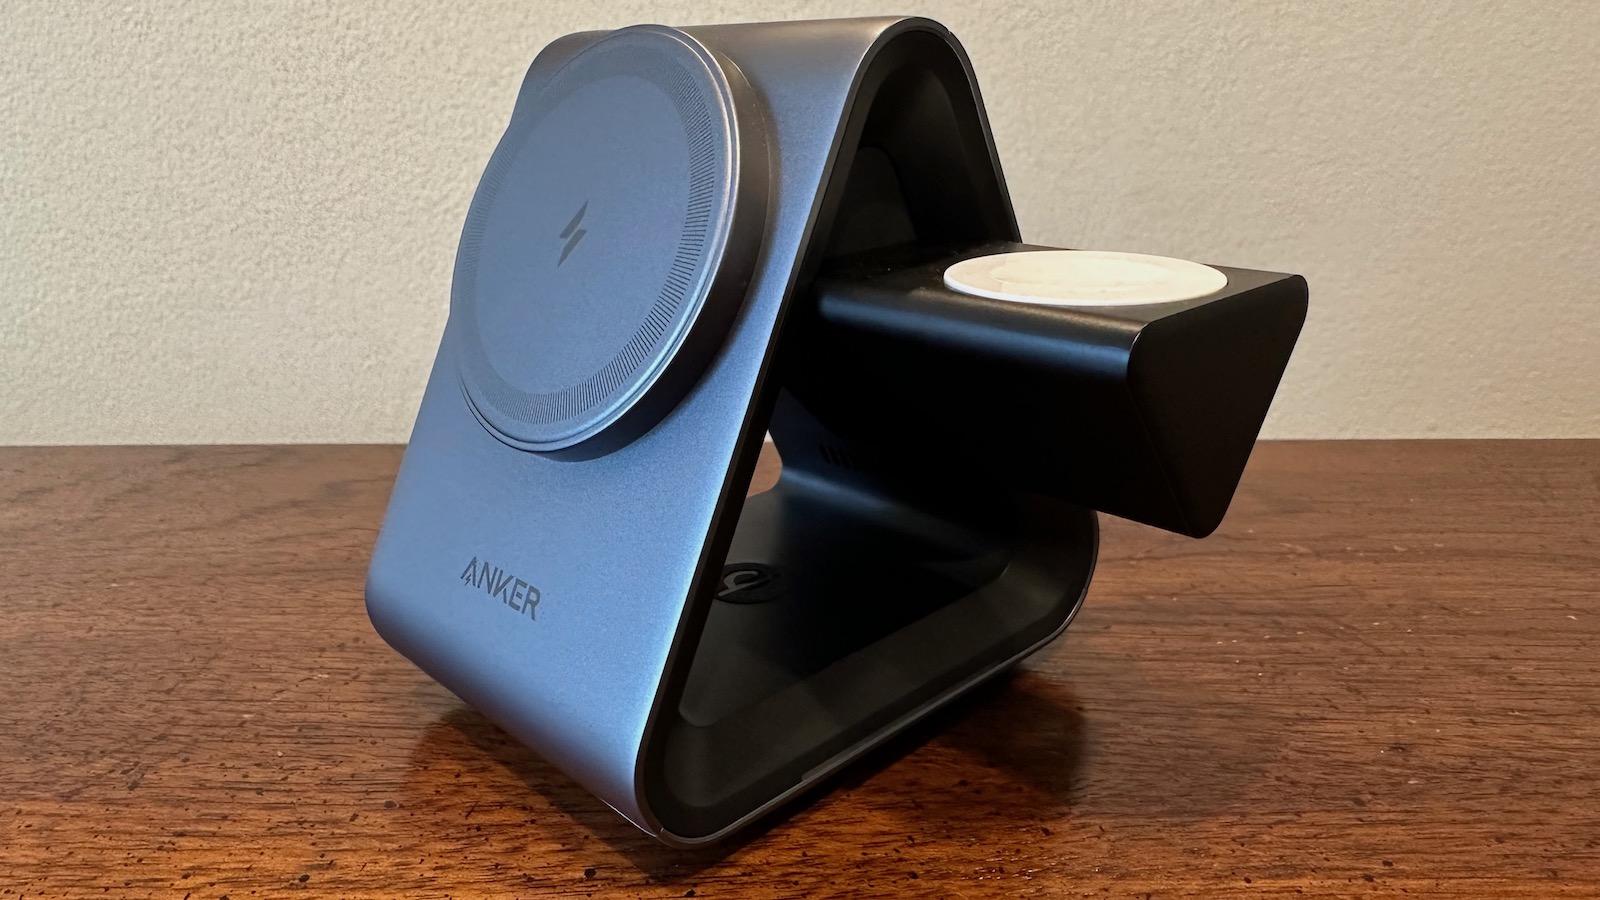 Review: Anker's 737 MagGo 3-in-1 MagSafe Charger Looks Futuristic